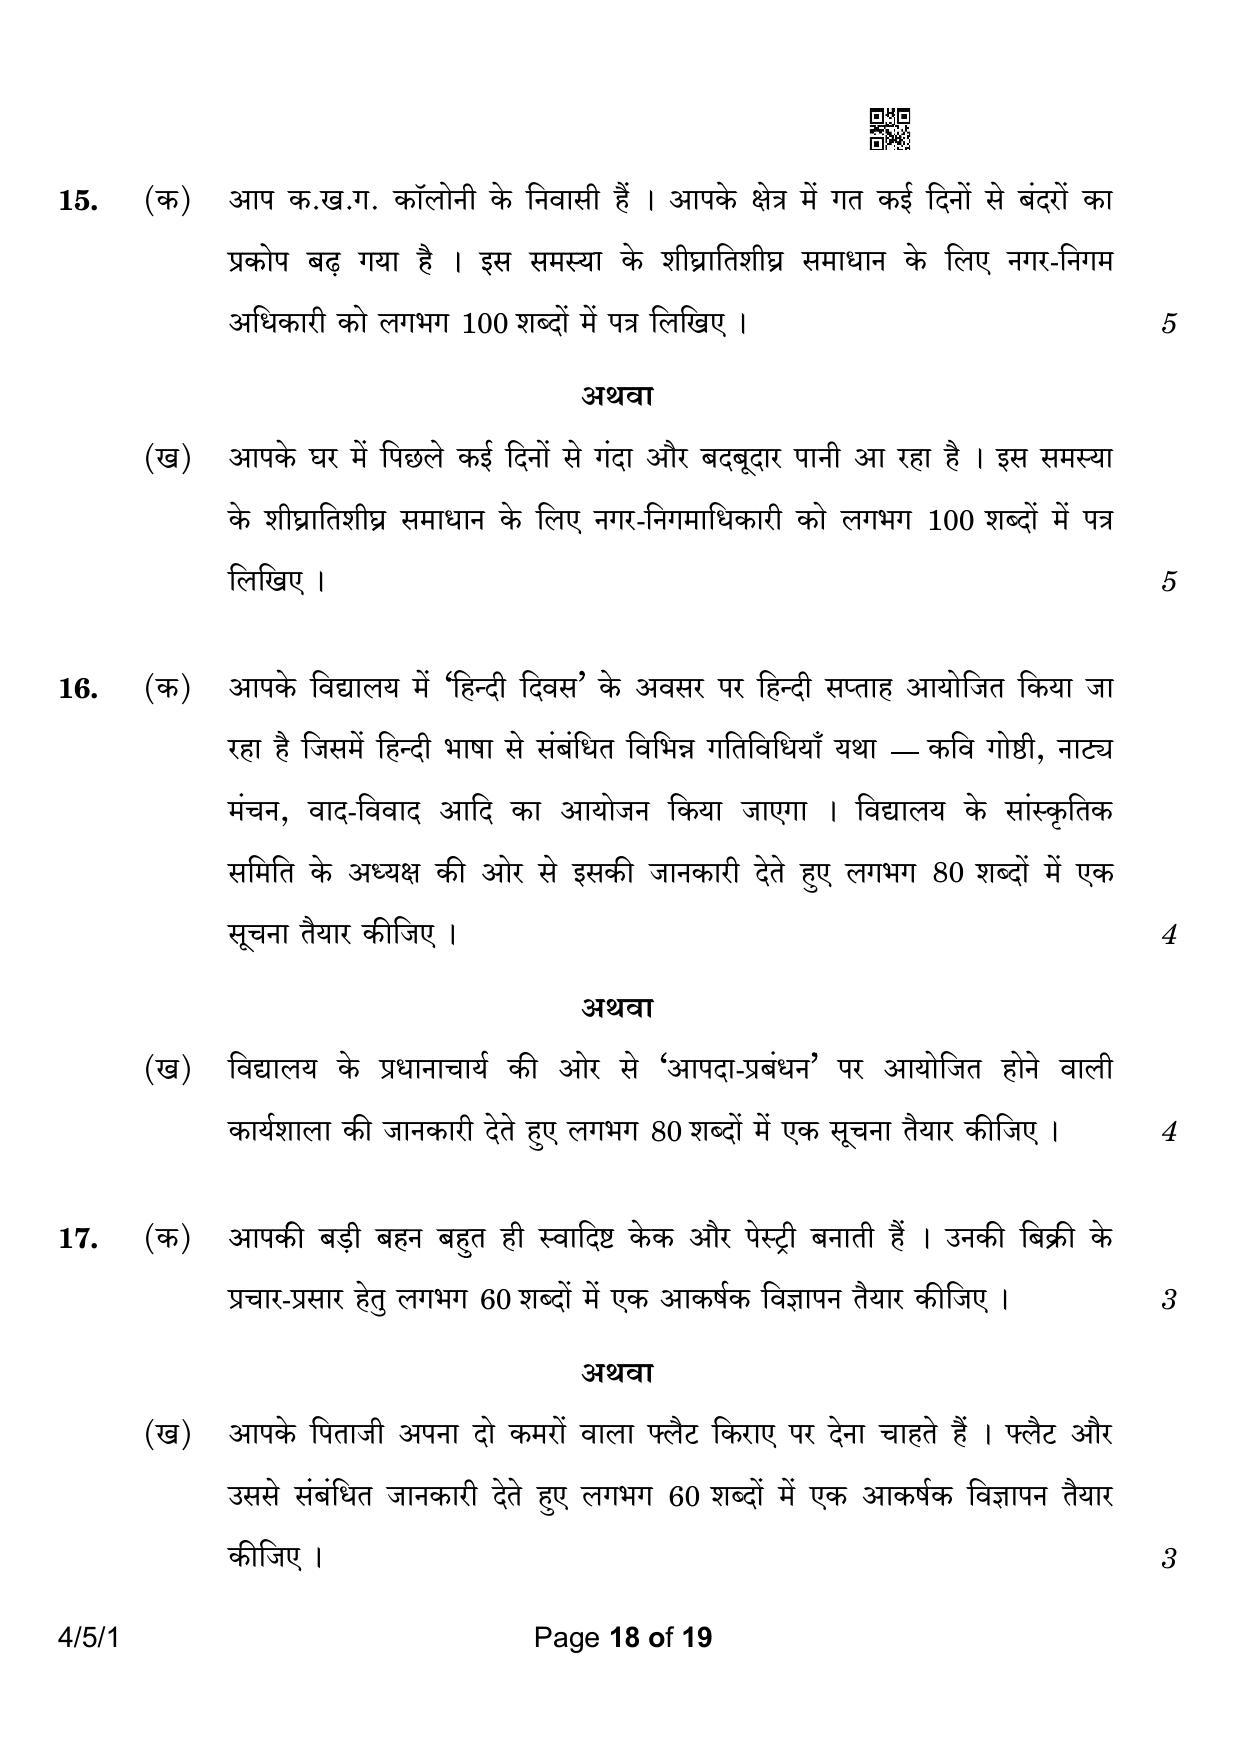 CBSE Class 10 4-5-1 Hindi B 2023 Question Paper - Page 18